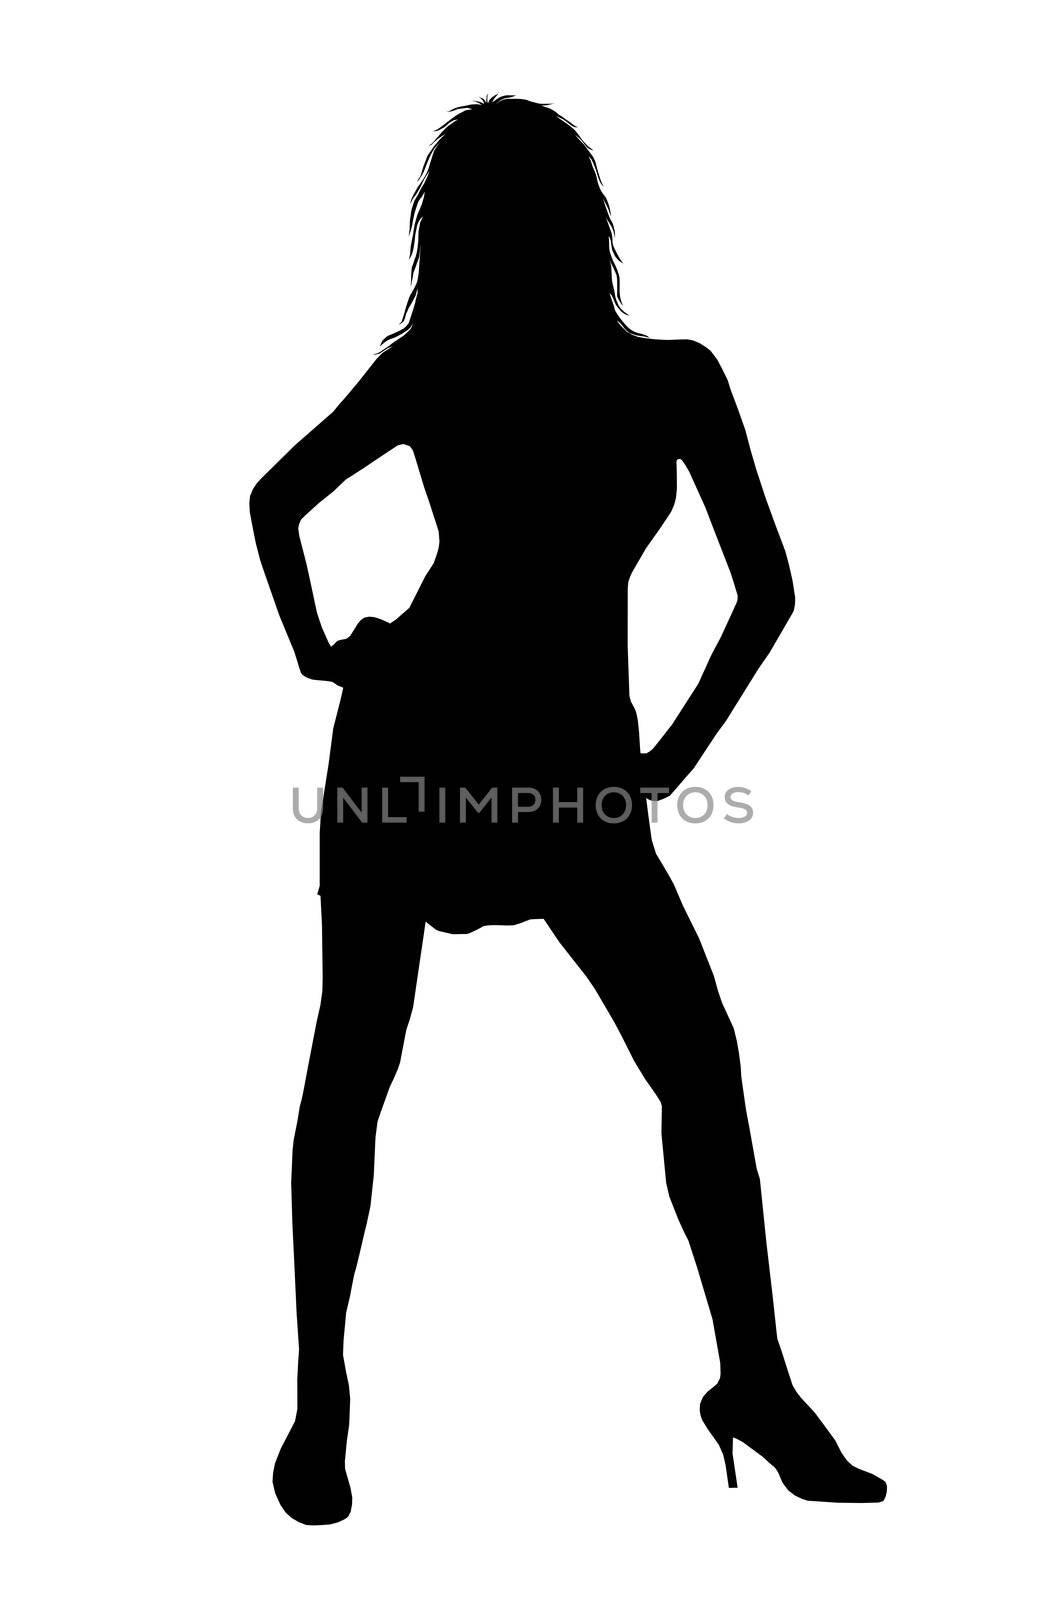 woman silhouette 2 by peromarketing